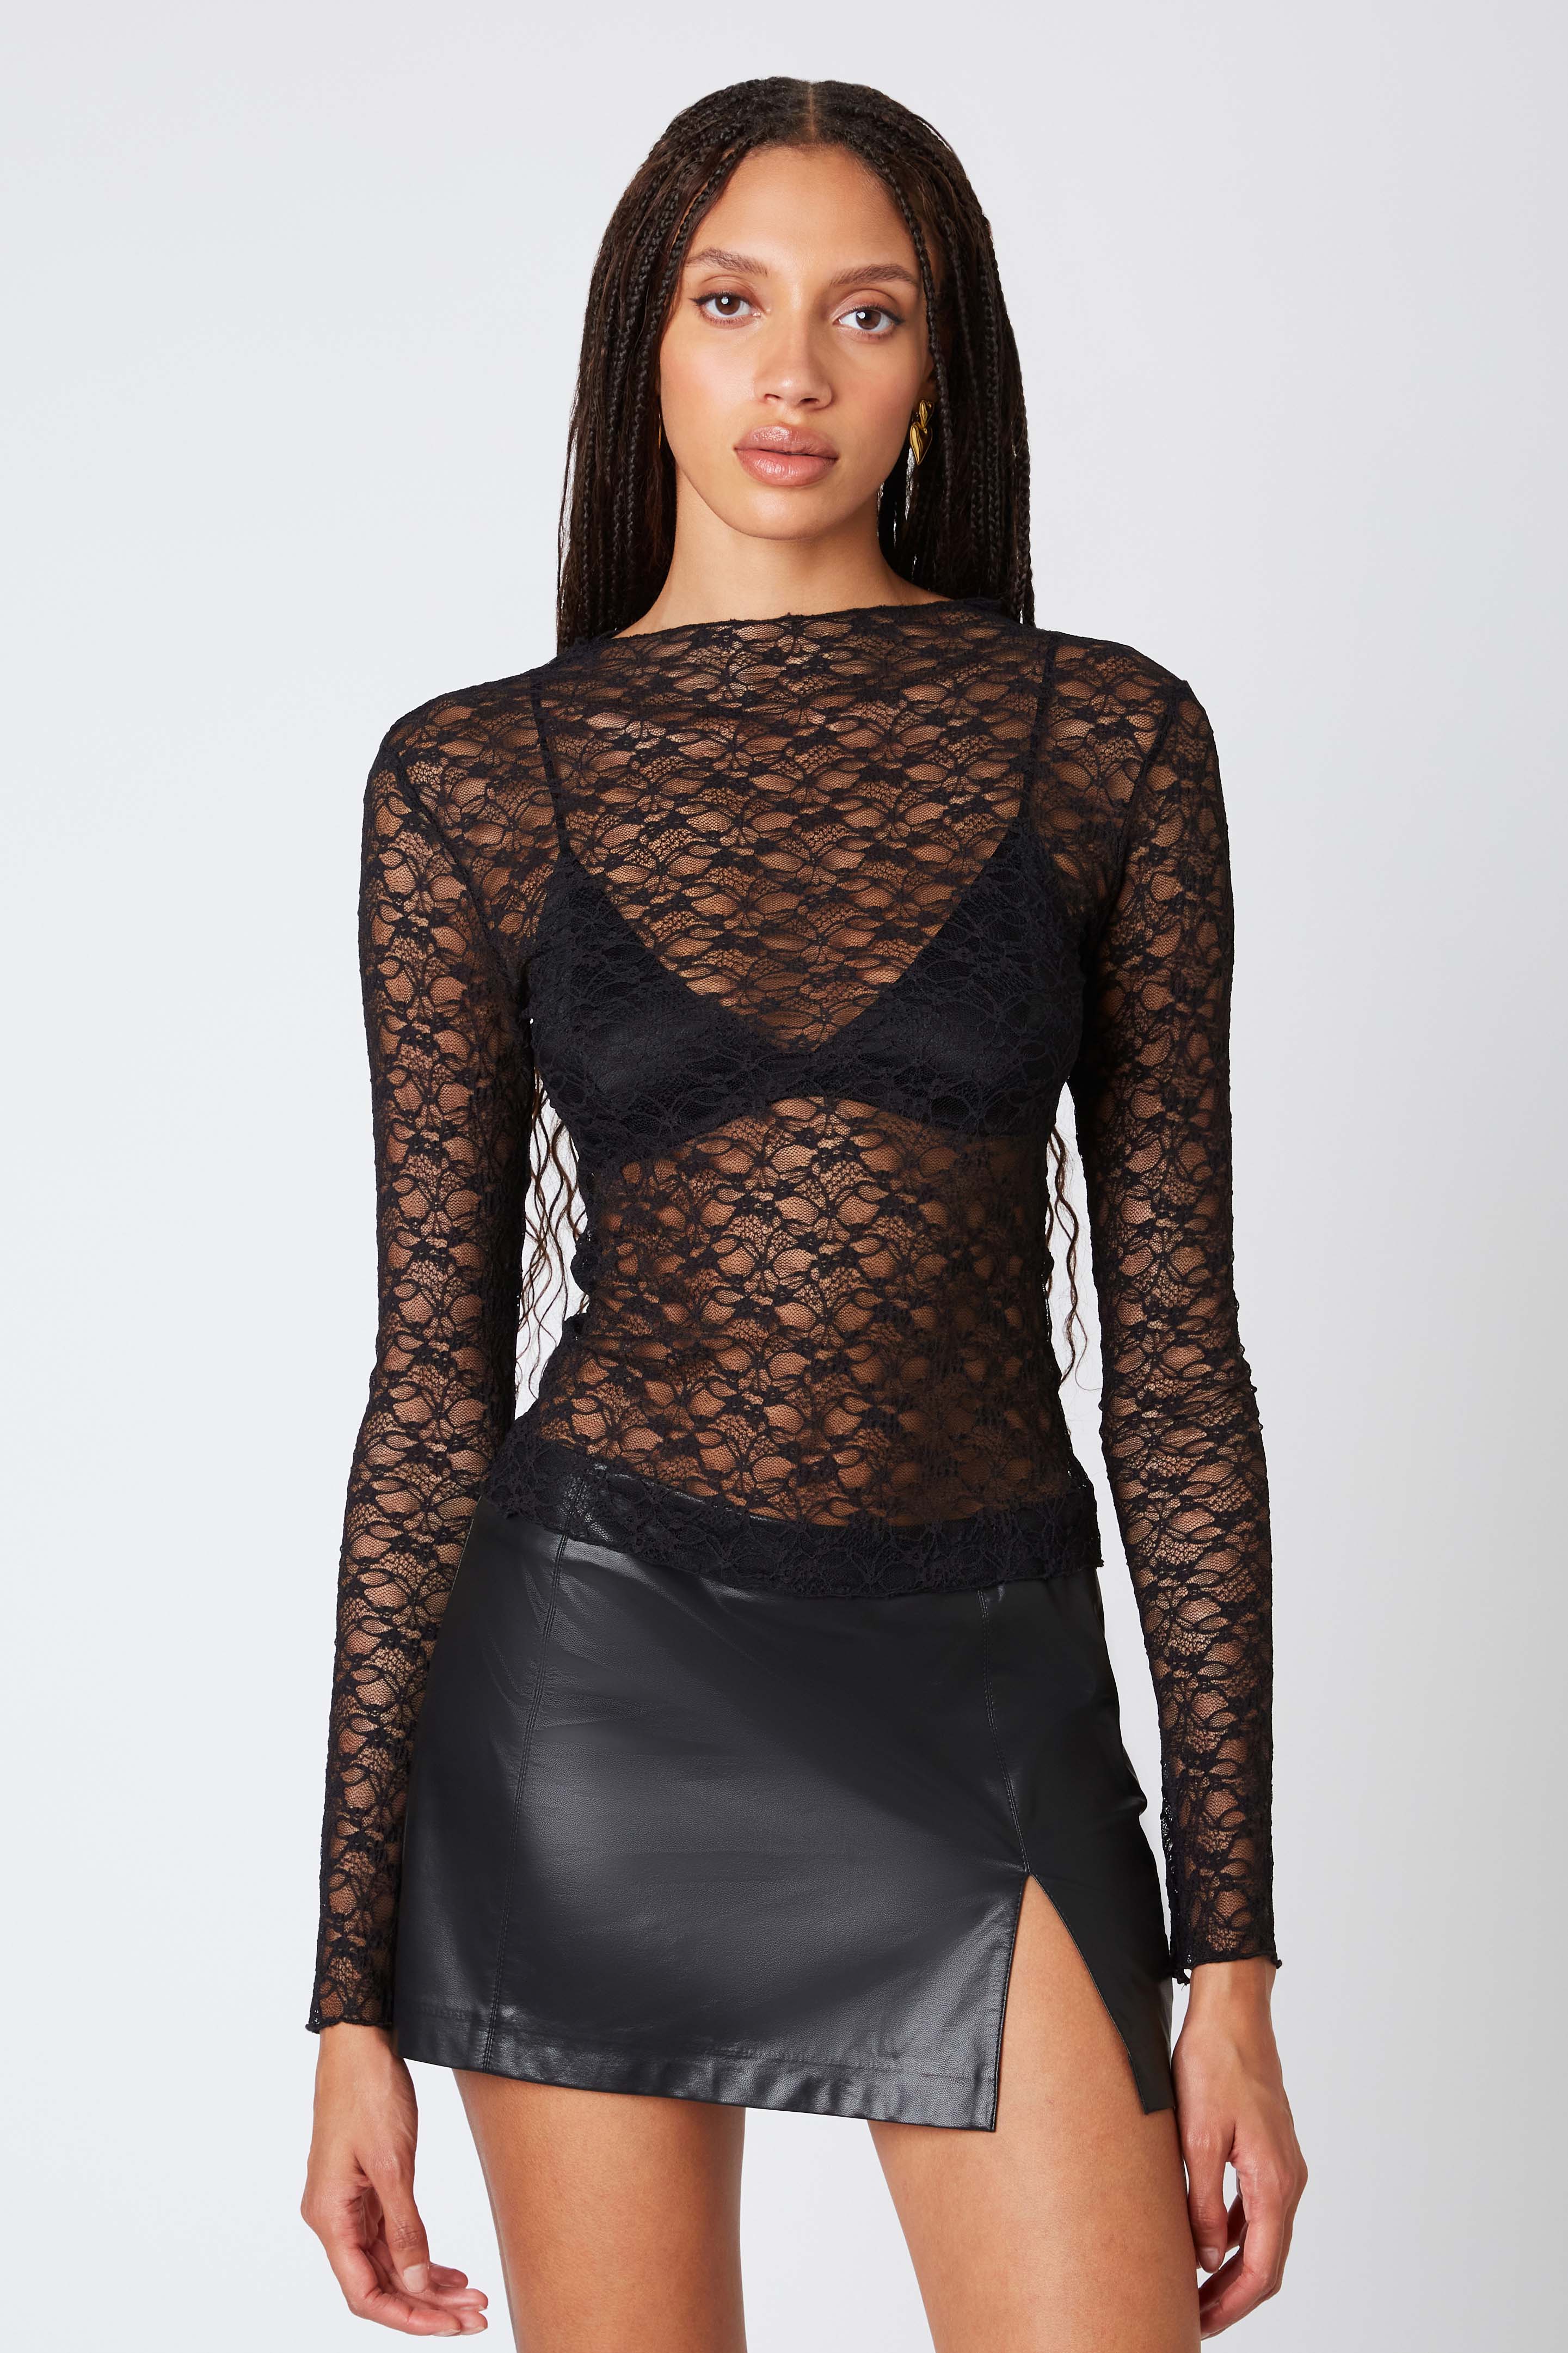 Floral Lace Long Sleeve in Black Front View